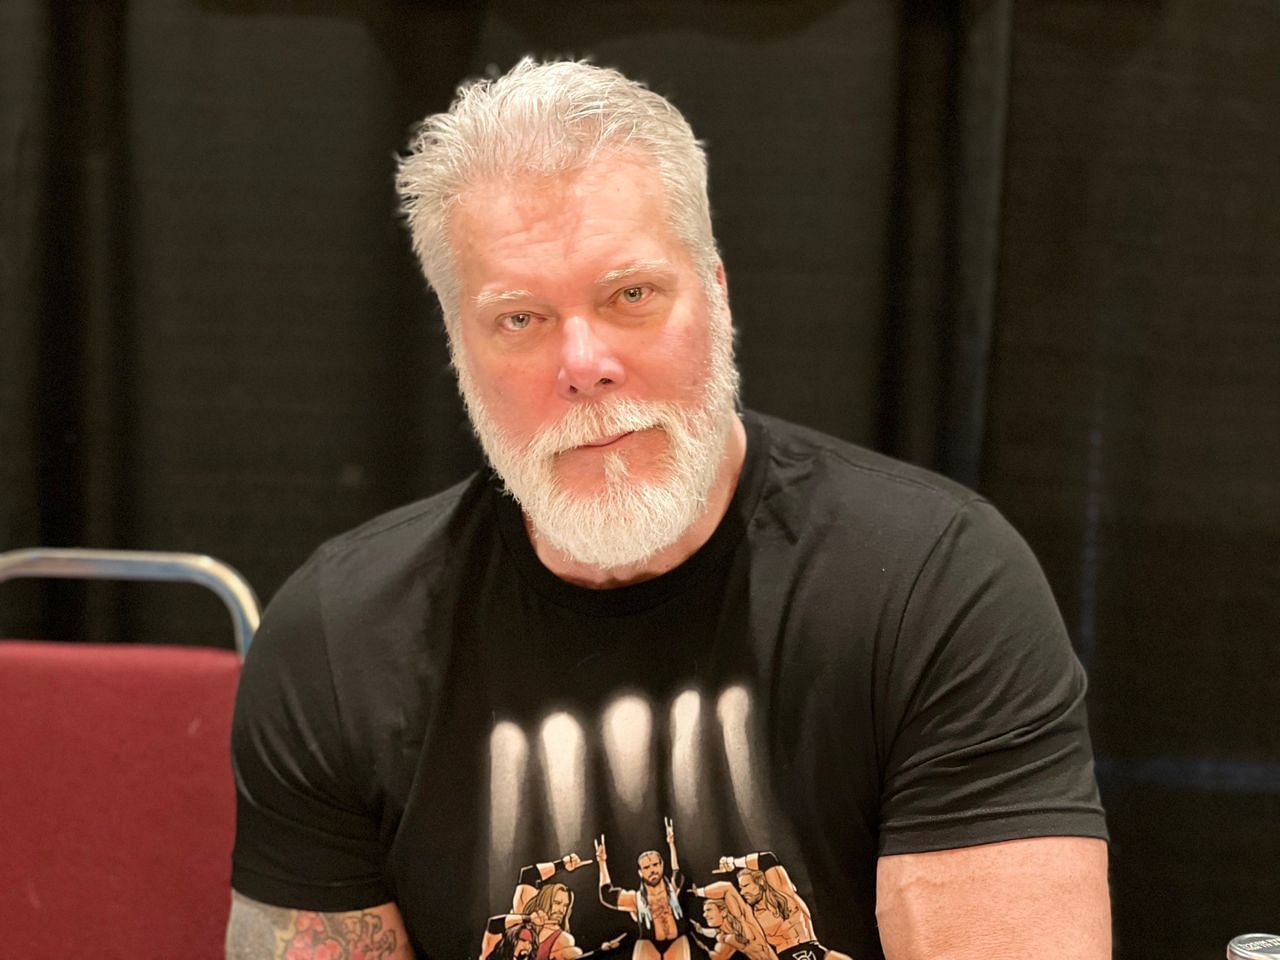 Kevin Nash was a budding college basketball player before becoming a legend in wrestling. [photo: PennLive.com]